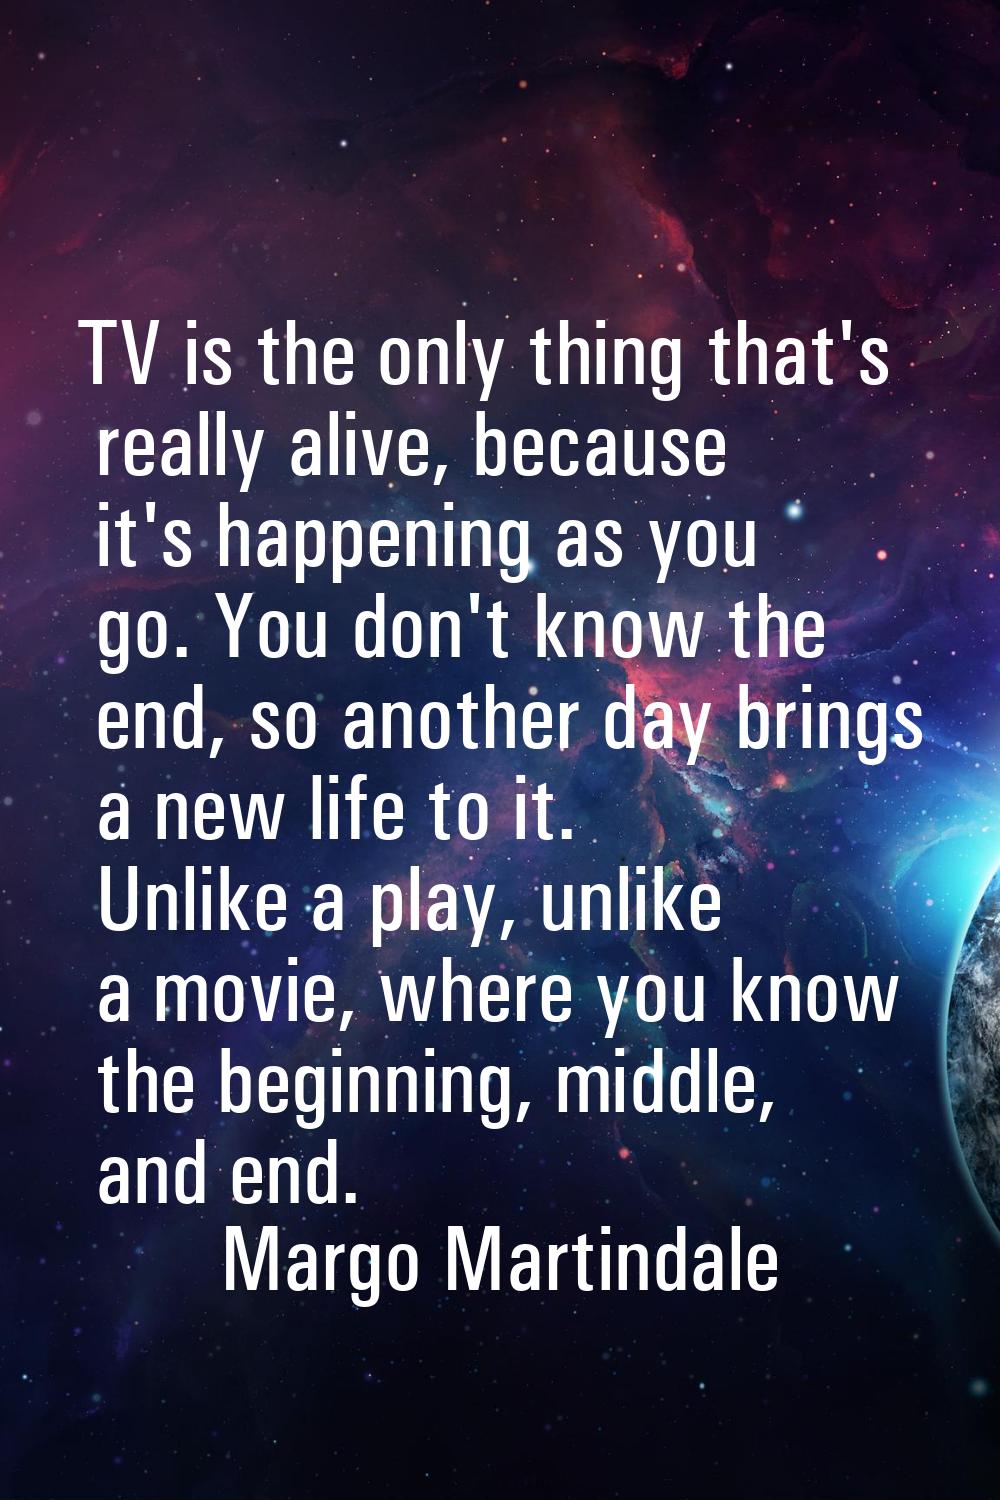 TV is the only thing that's really alive, because it's happening as you go. You don't know the end,